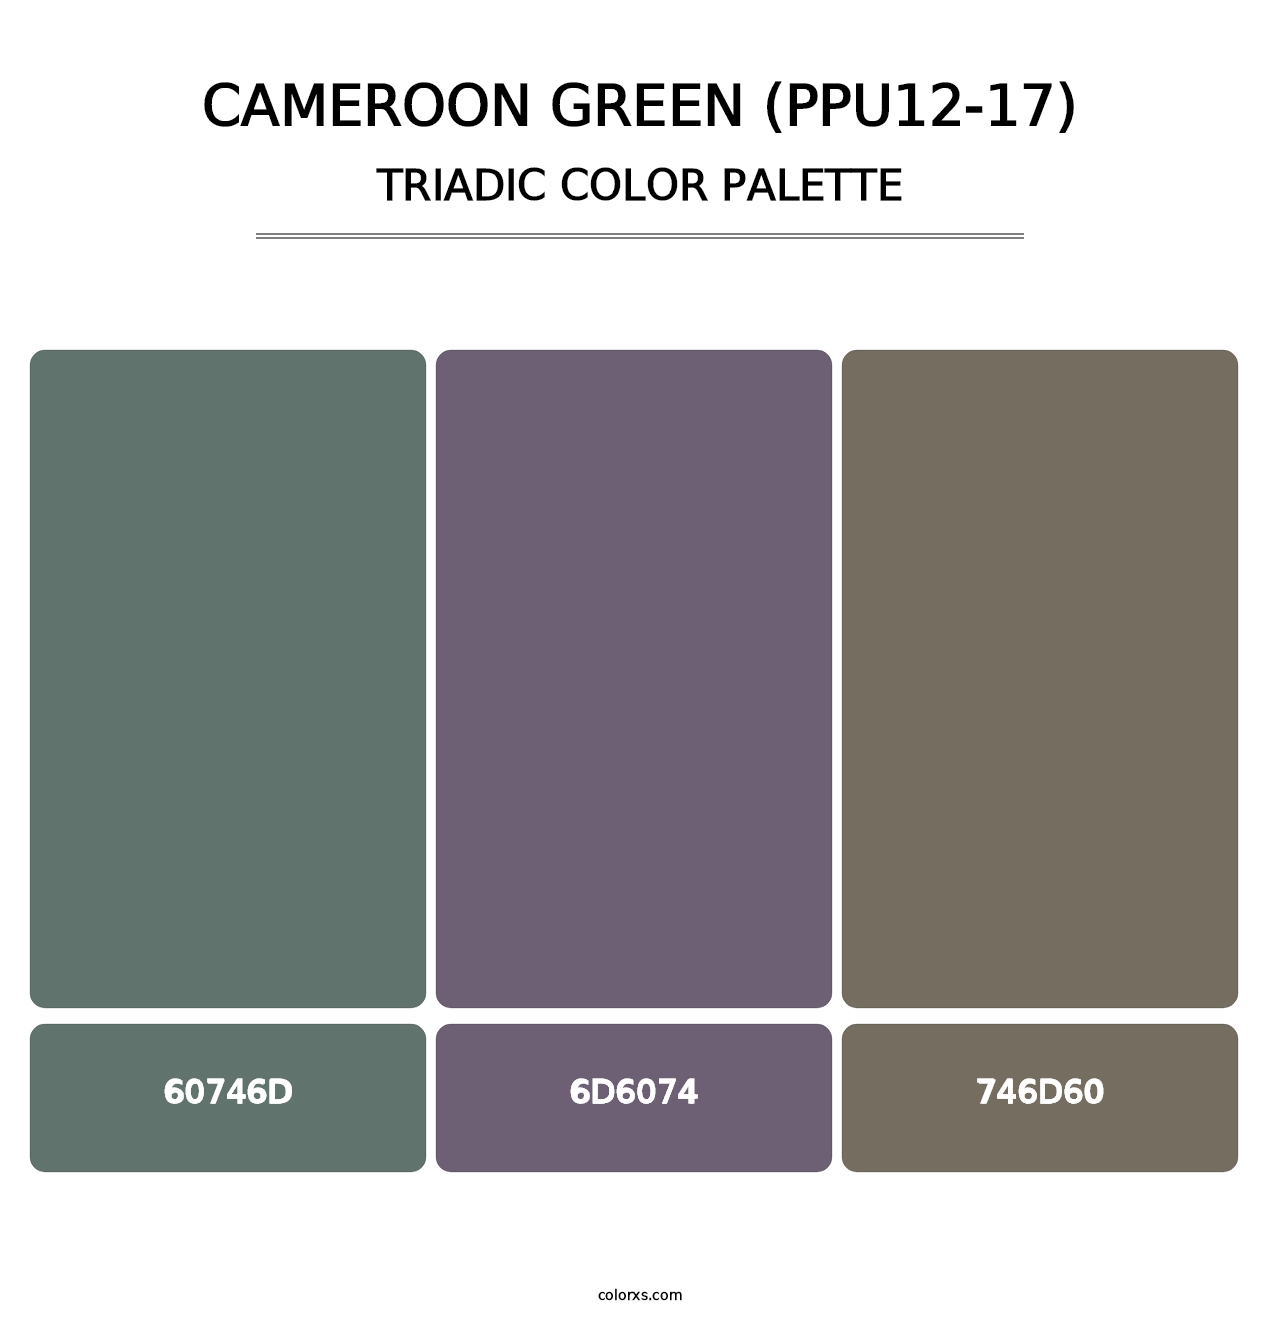 Cameroon Green (PPU12-17) - Triadic Color Palette